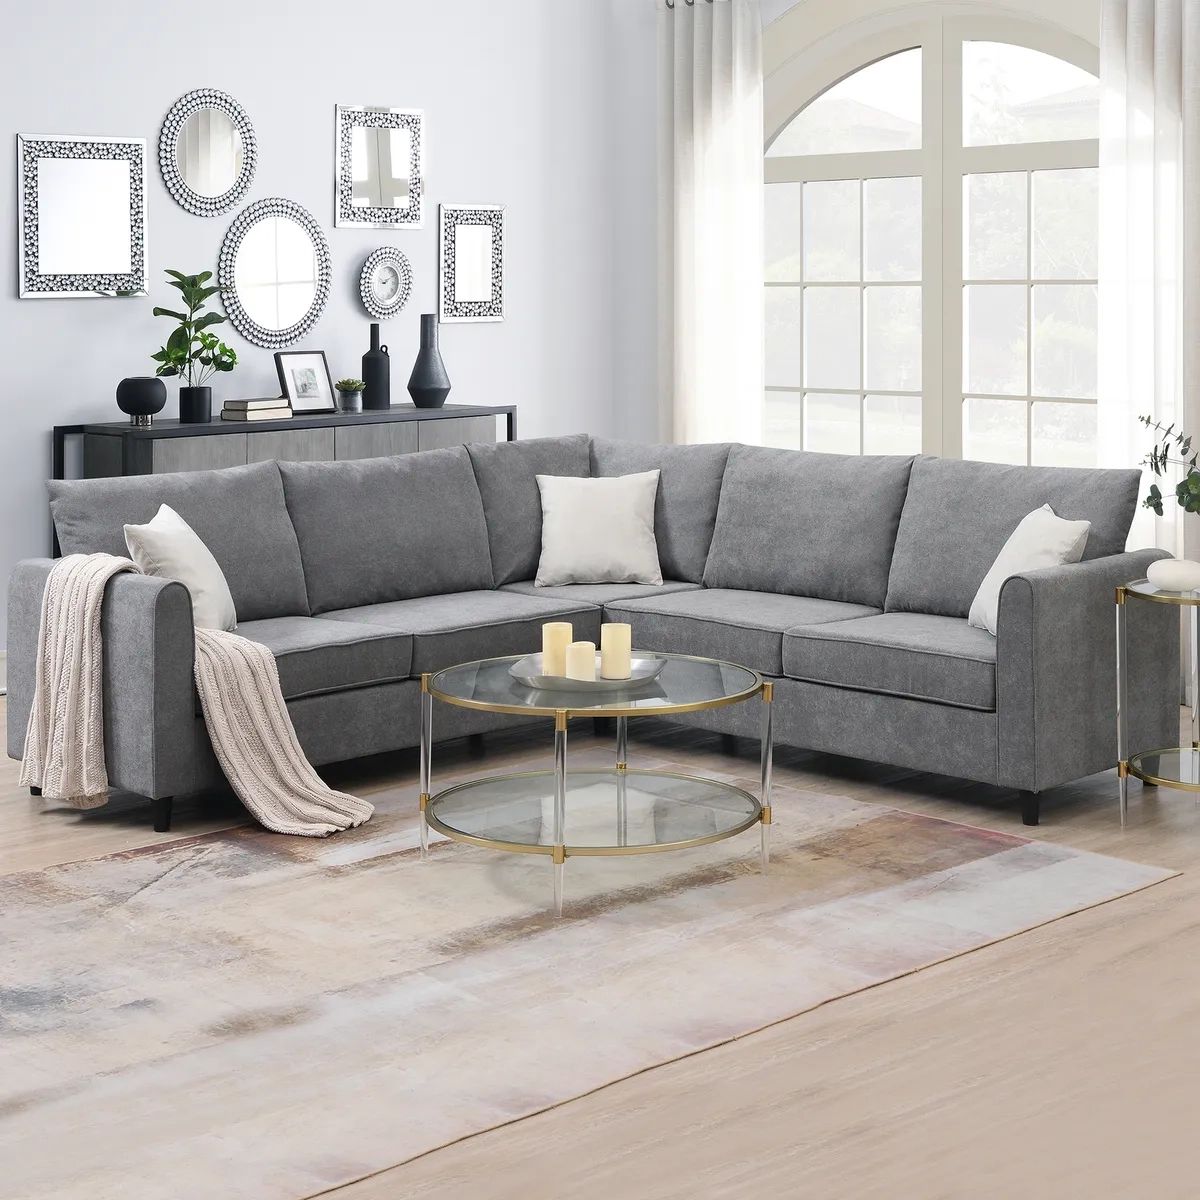 Habitrio Modern Sectional Sofa Set L Shaped Upholstered Couches Gray W/3  Pillows 195358179284 | Ebay With Regard To Modern L Shaped Sofa Sectionals (Photo 11 of 15)